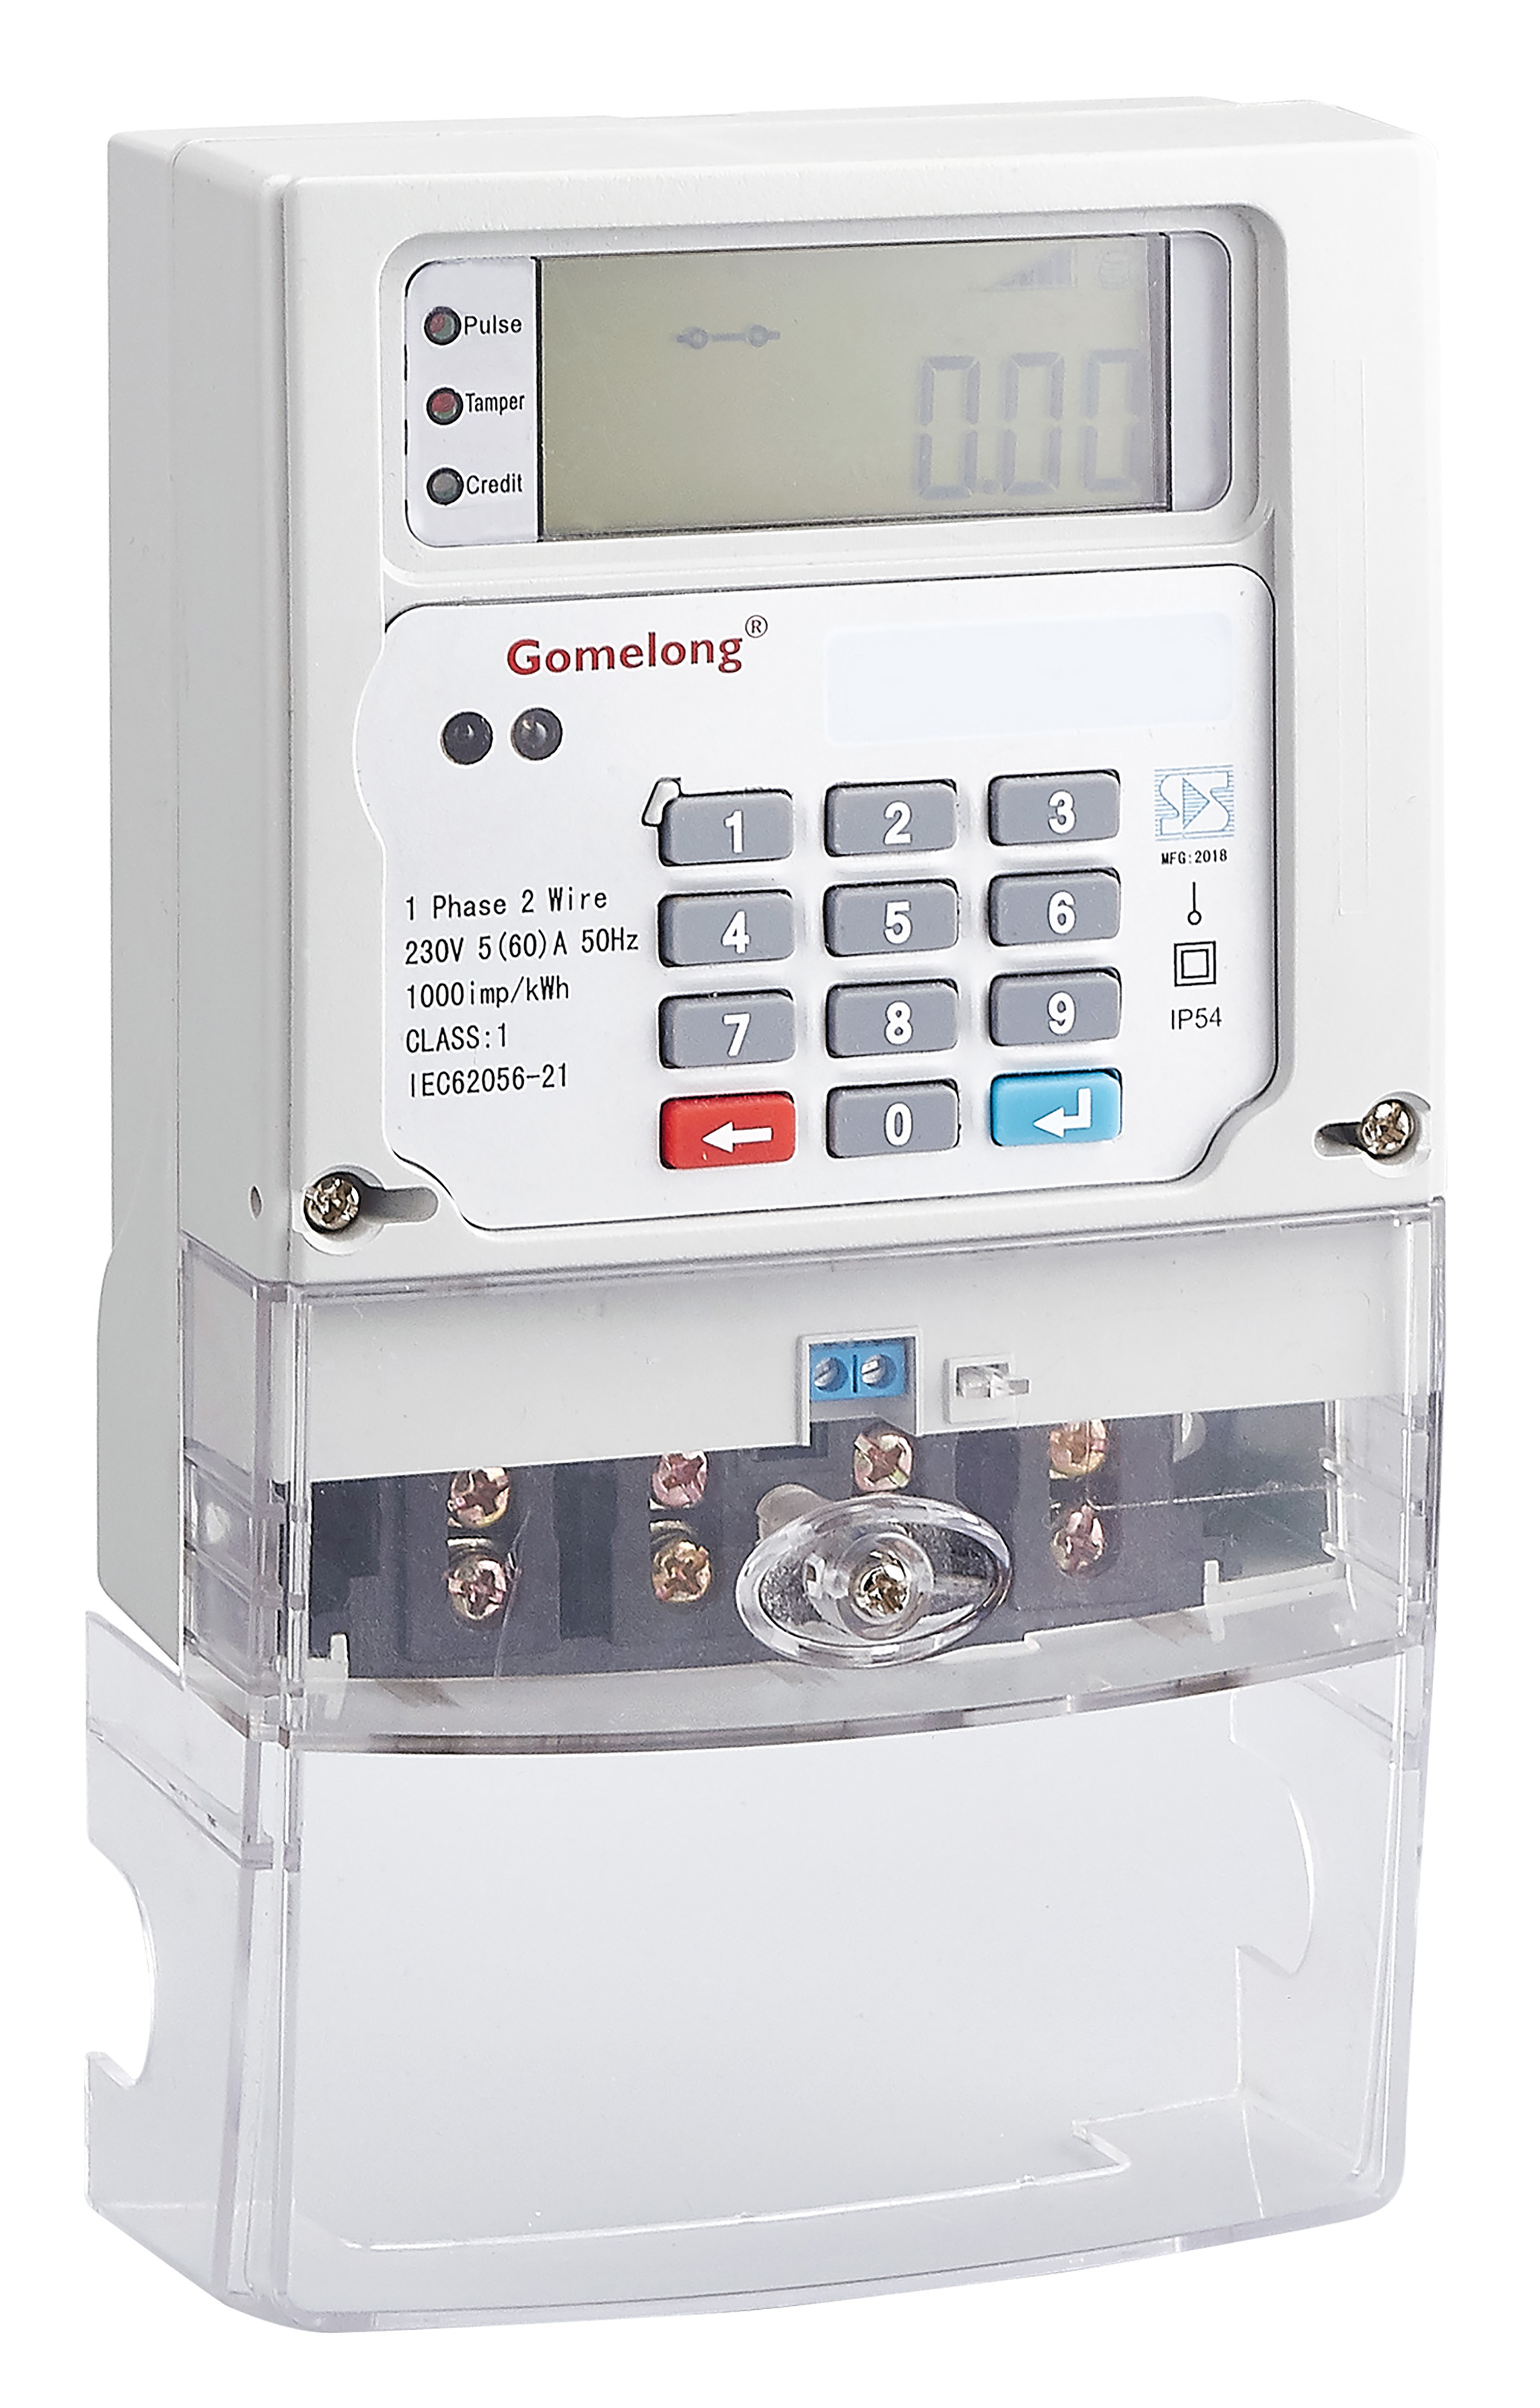 What are the advantages of our prepaid sts energy meter